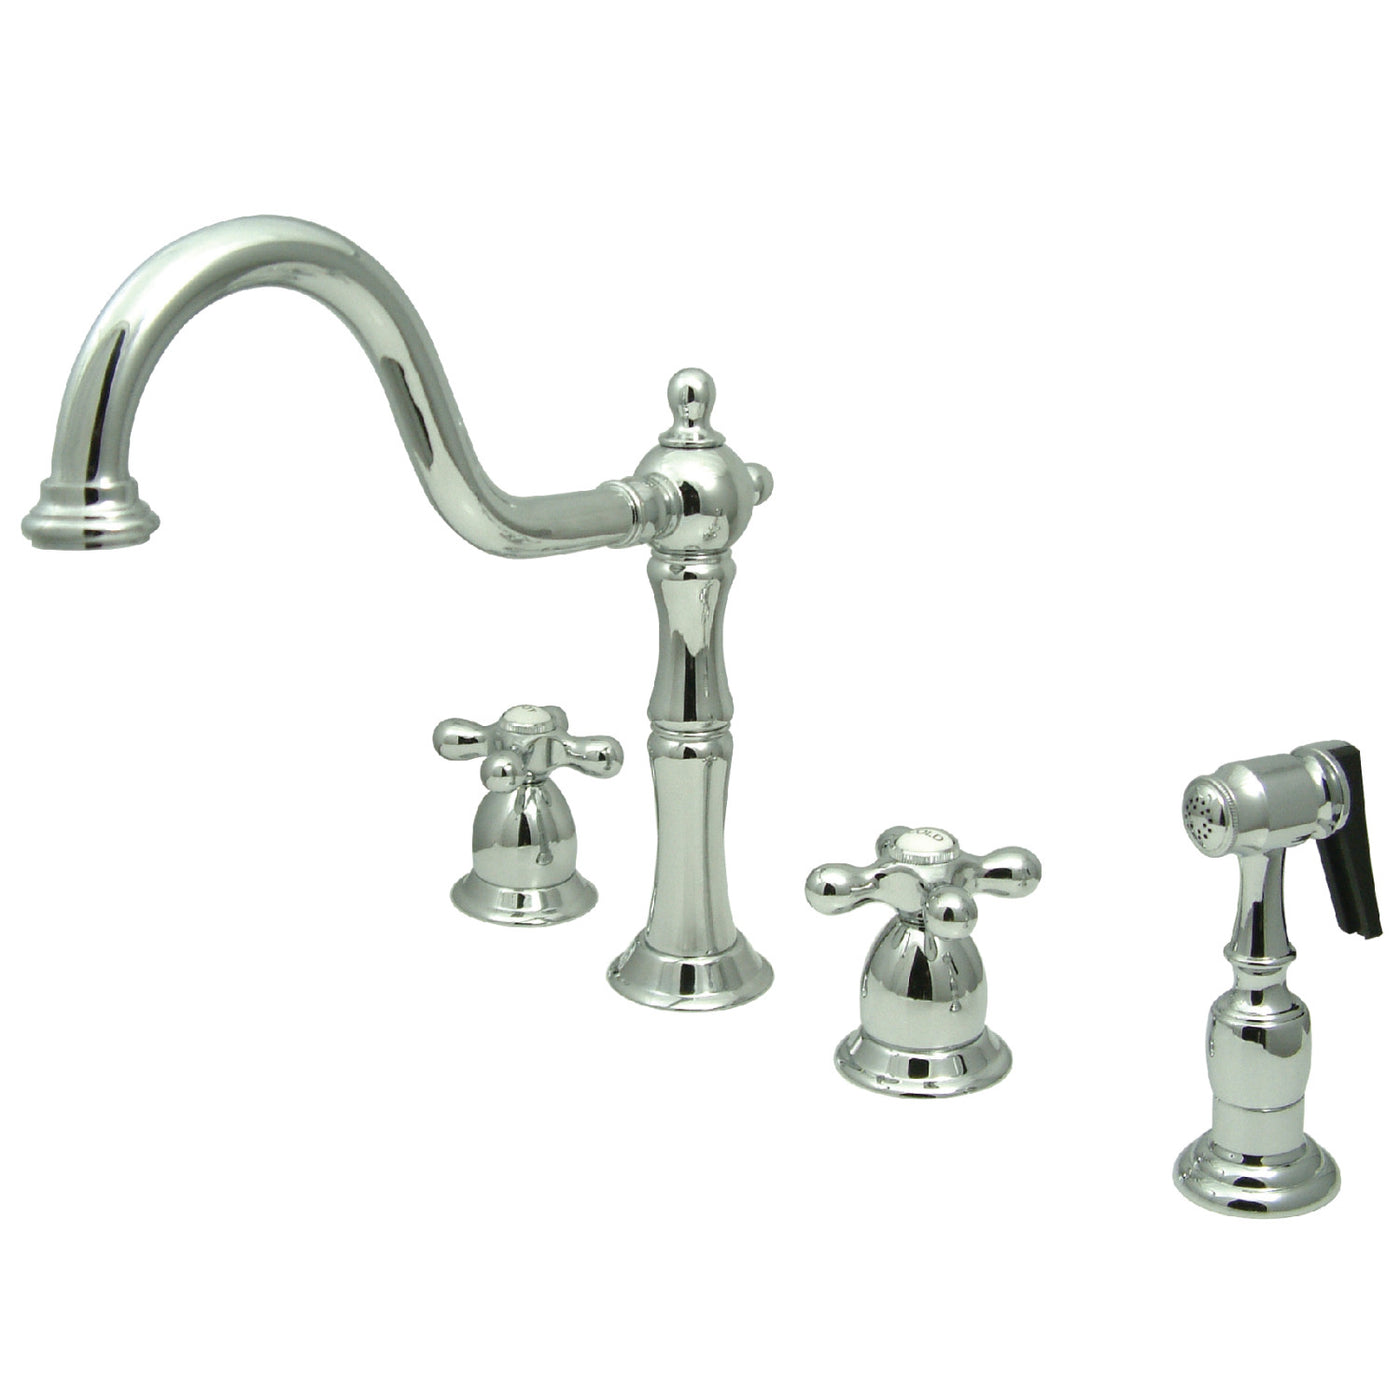 Elements of Design EB1791AXBS Widespread Kitchen Faucet with Brass Sprayer, Polished Chrome